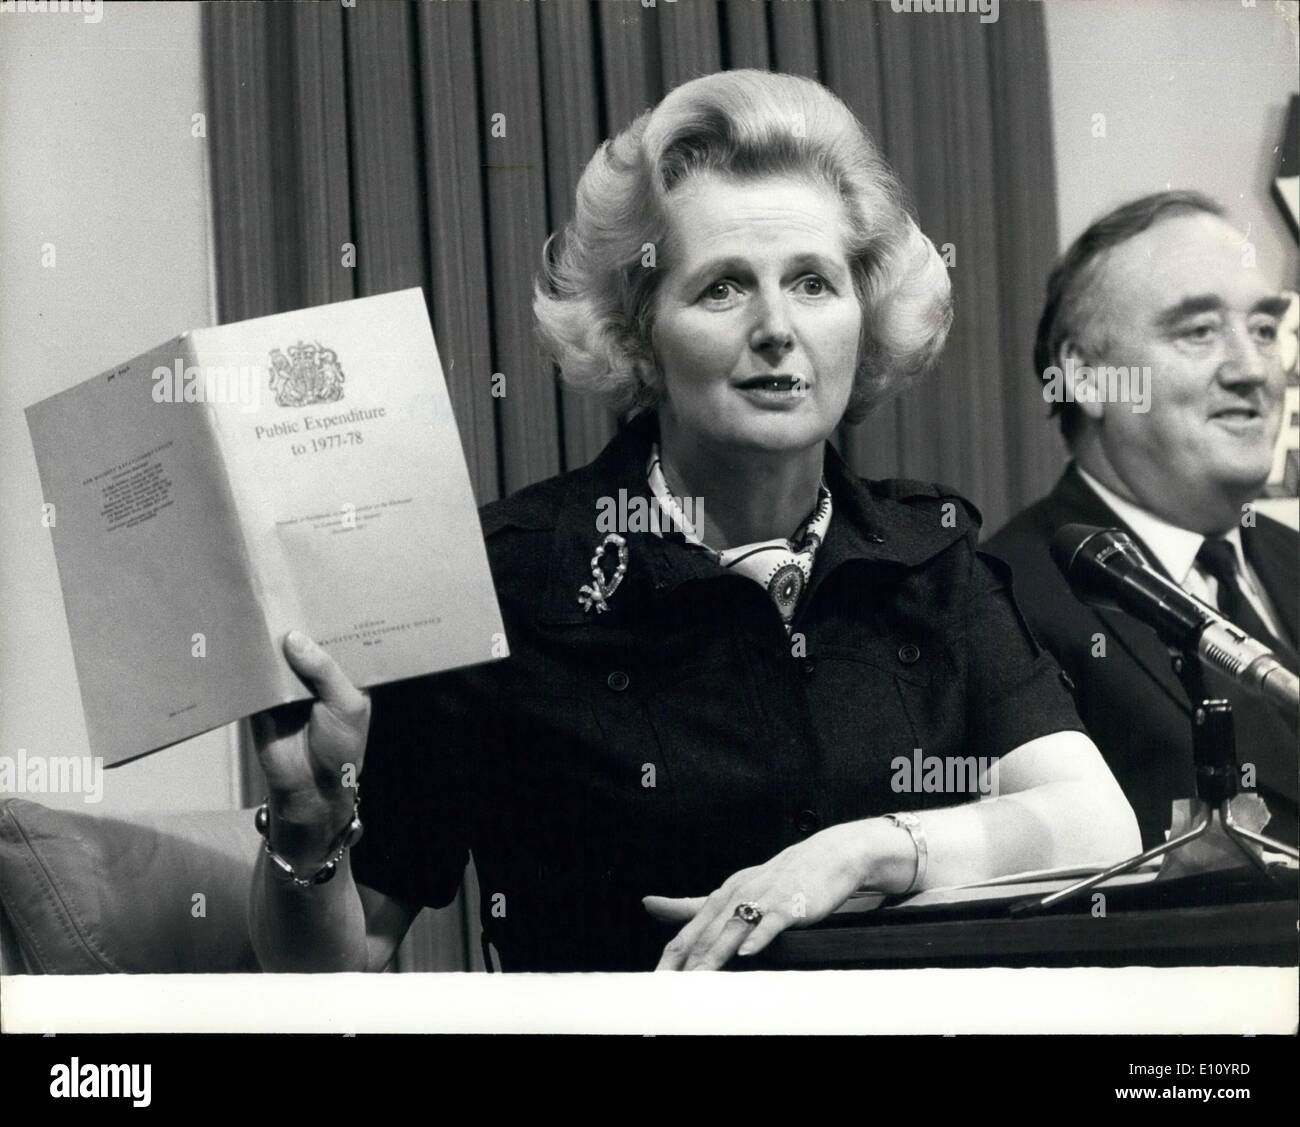 Sep. 09, 1974 - Mrs. Thatcher promises 9 1/2 percent mortgages by Christmas a tory election pledge: The Conservatives took the initiative in the election campaign yesterday with an absolutely firm pledge that their plan for a maximum mortgage rate of 9 1/2 percent will be introduced by Christmas. The pledge was given by Mrs. Margaret Thathcer, leader of the study group which devised the plan. The present mortgage rate is 11 percent. Photo shows Mrs. Margaret Thatcher making her election promise of 9 1/2 percent in London yesterday. with her at the Conservative Press conference is Mr Stock Photo